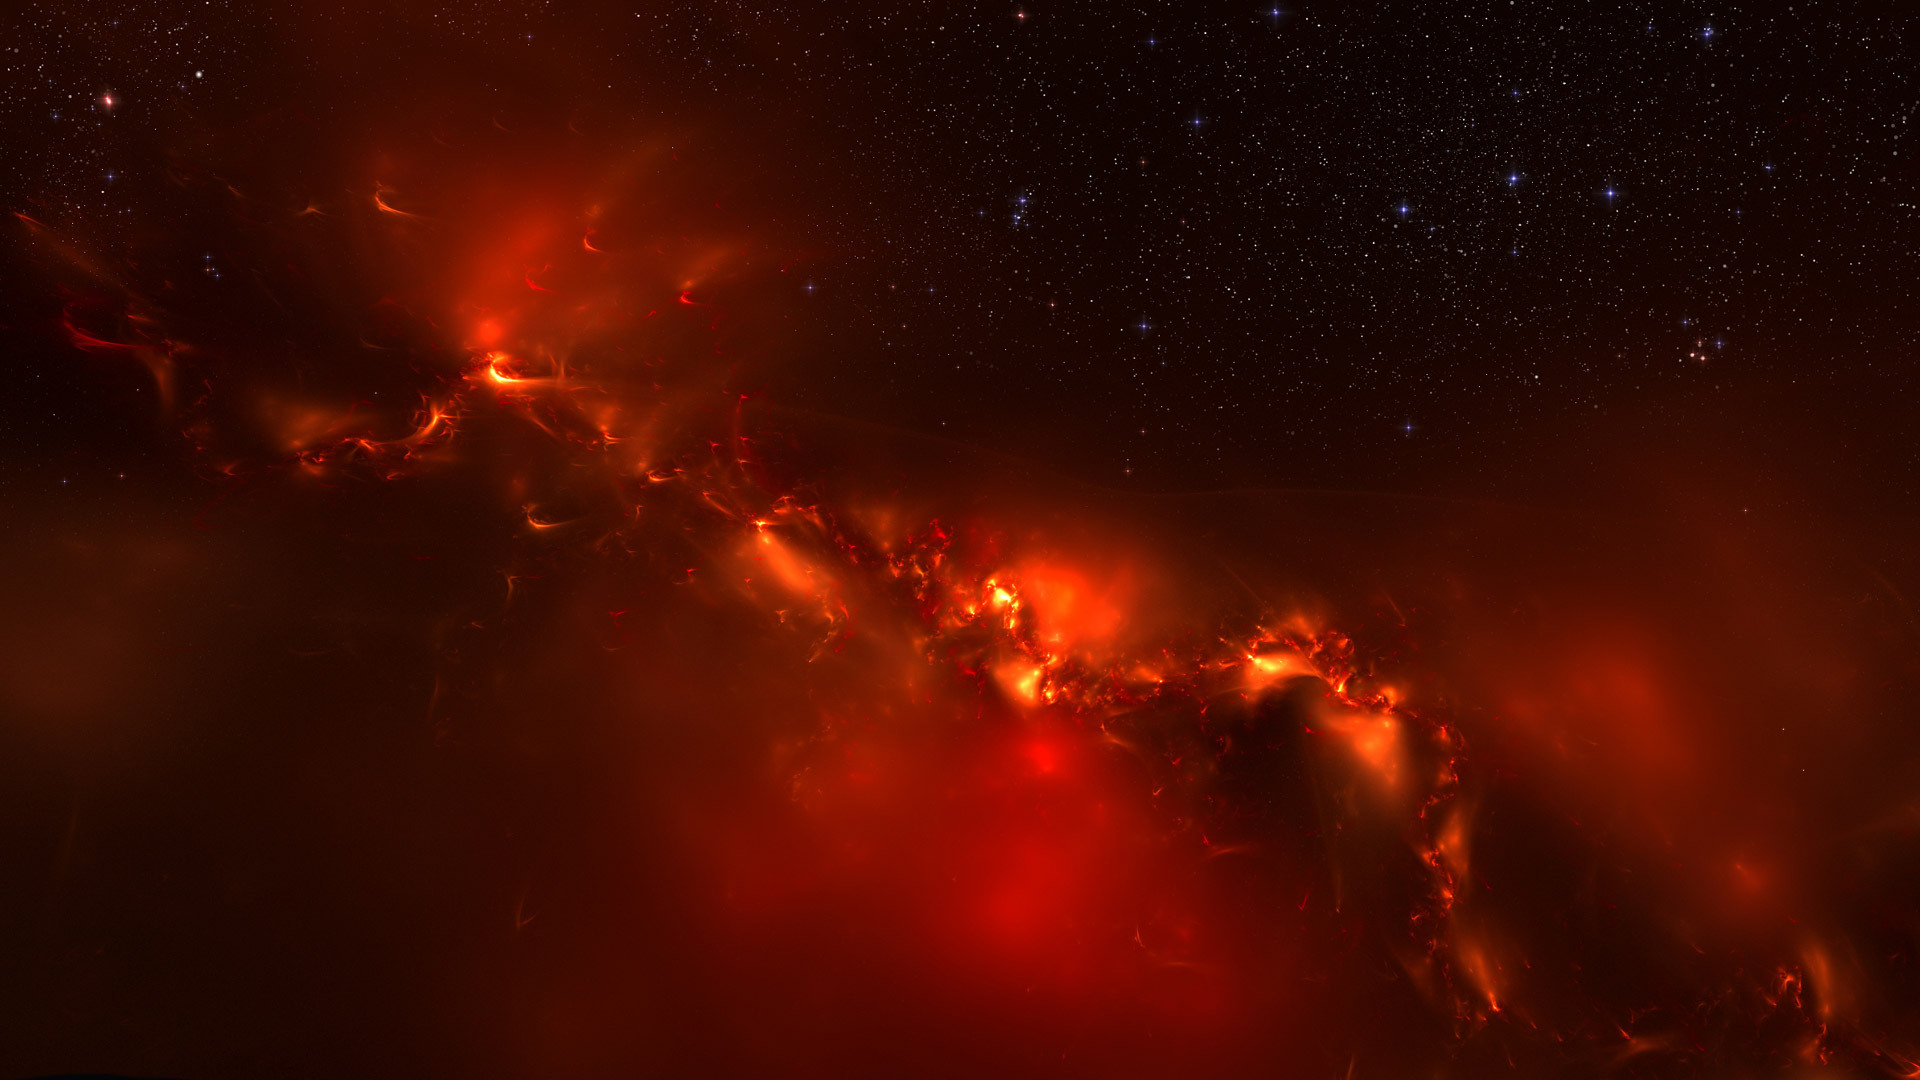 Wallpapers nebula red dust on the desktop